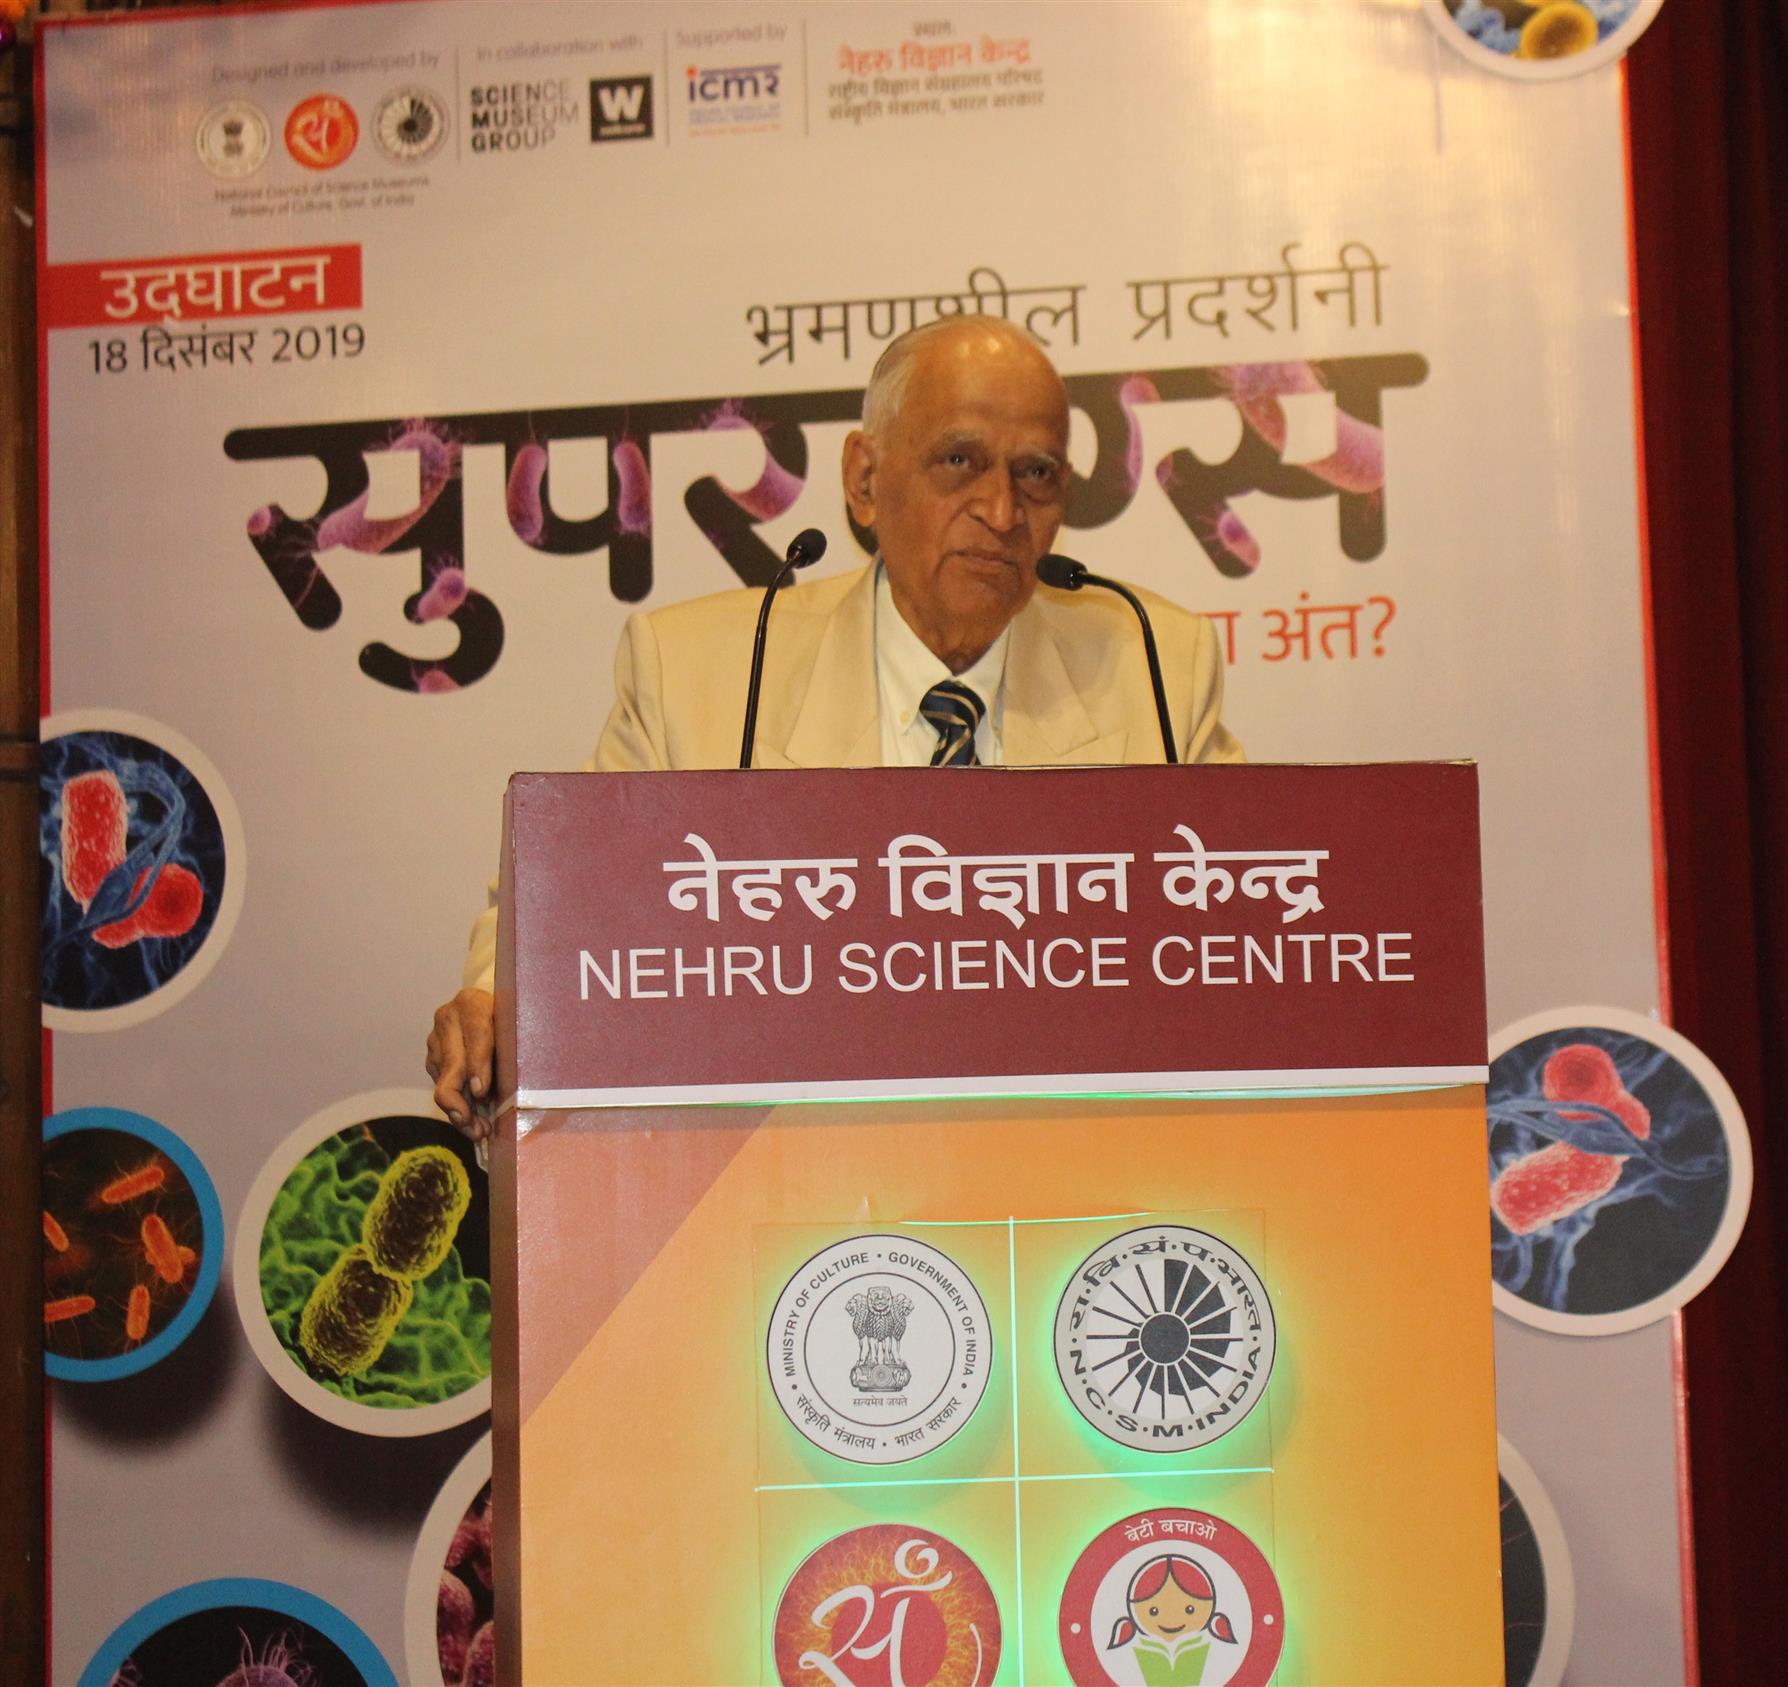 Prof. M. M. Sharma, Emeritus Professor of Eminence, Institute of Chemical Technology, Mumbai speaking at the inauguration of a travelling exhibition titled “Superbugs: The End of Antibiotics?” at  Nehru Science Centre in Mumbai on 18.12.2019